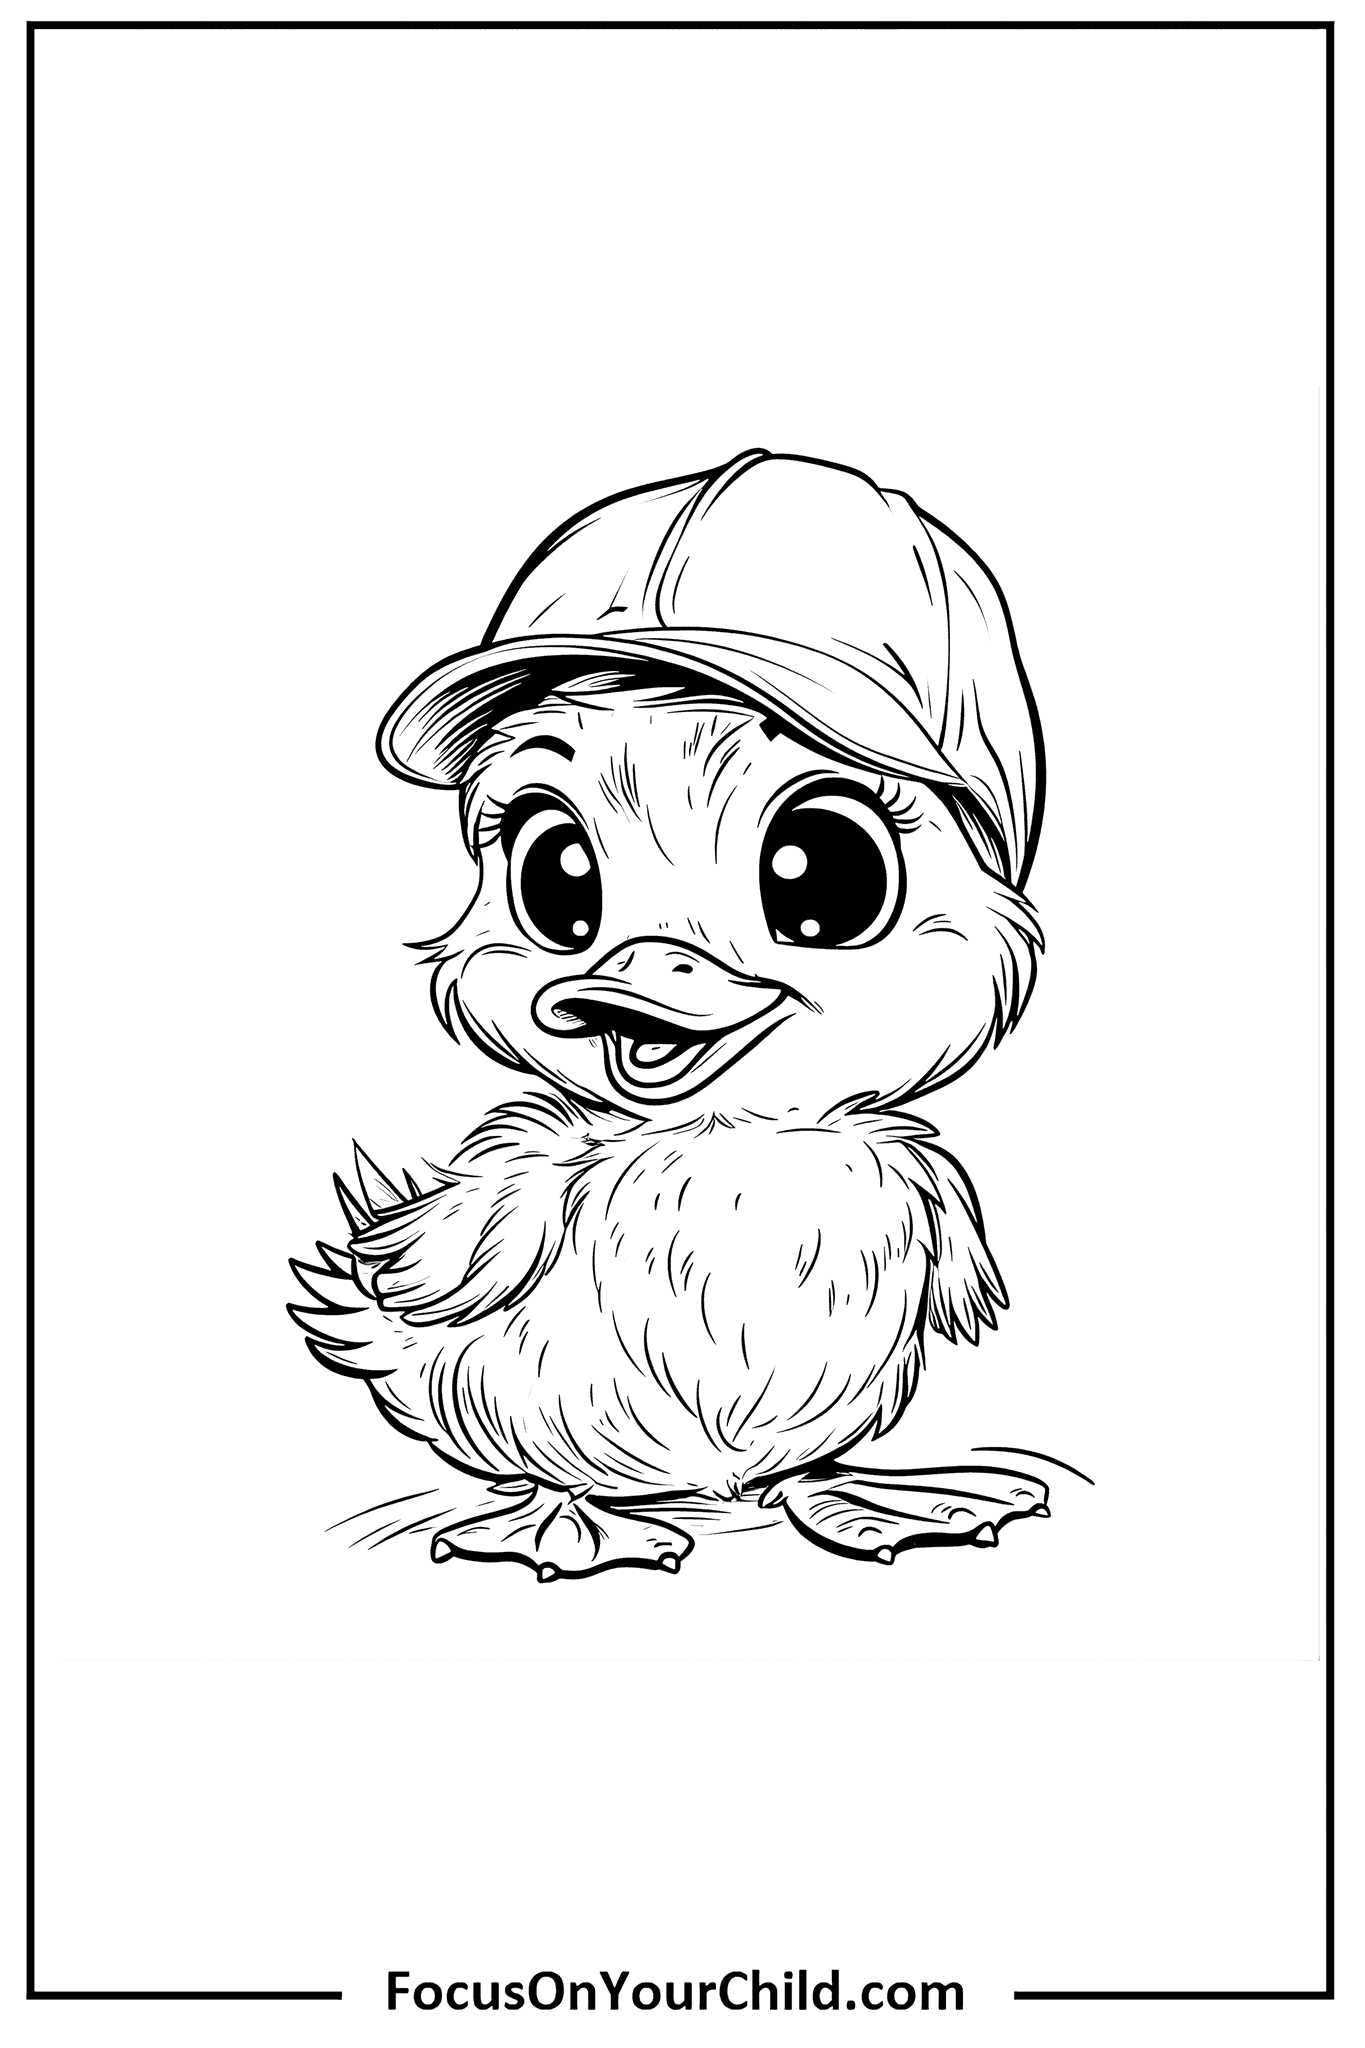 Anthropomorphized chick illustration with cap, perfect for childrens coloring activities.